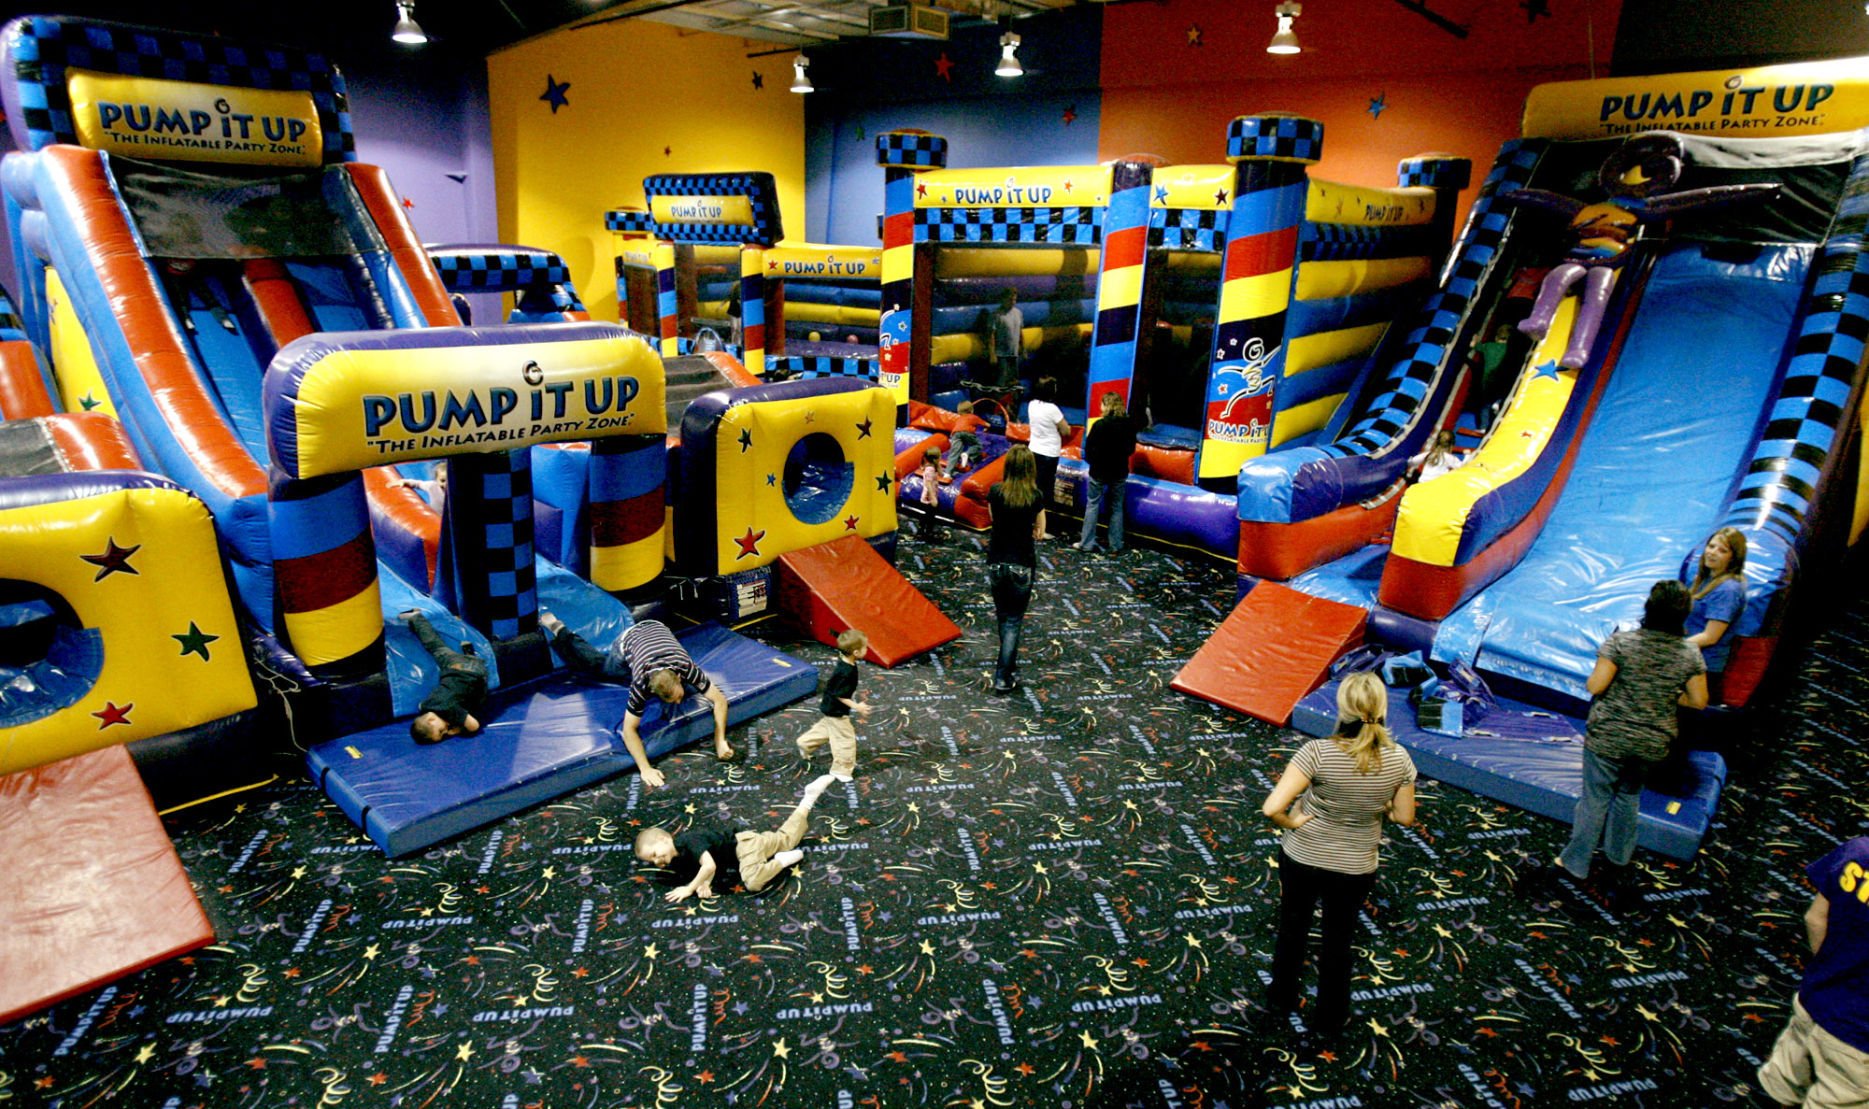 Free jump time at Pump it Up Families tucson com